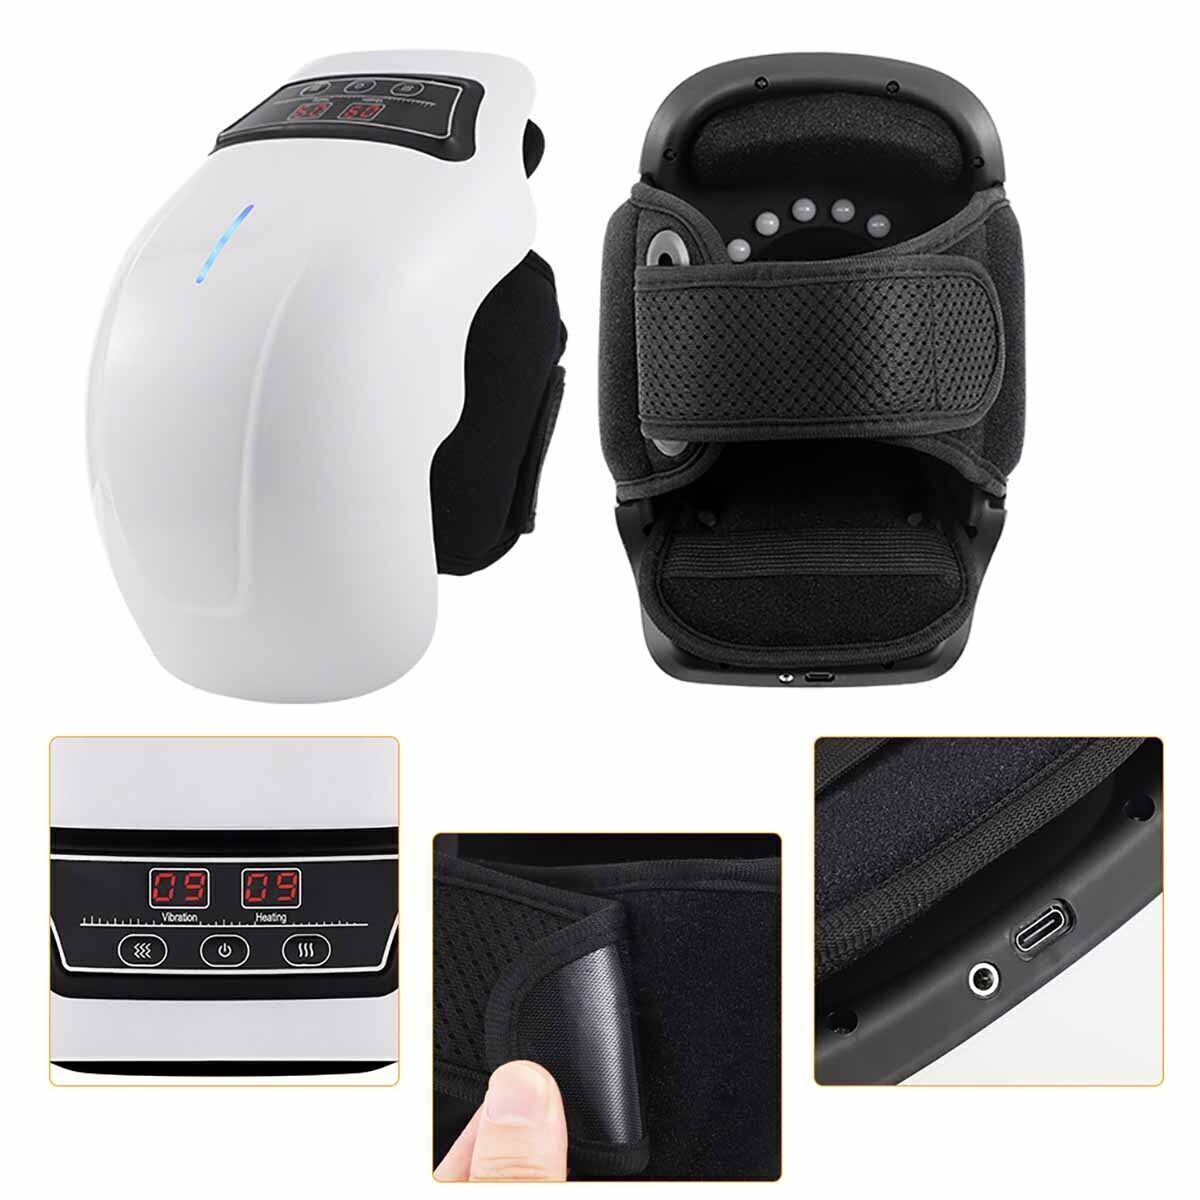 Ergonomic Infrared Knee Massager - Joint Pain Relief